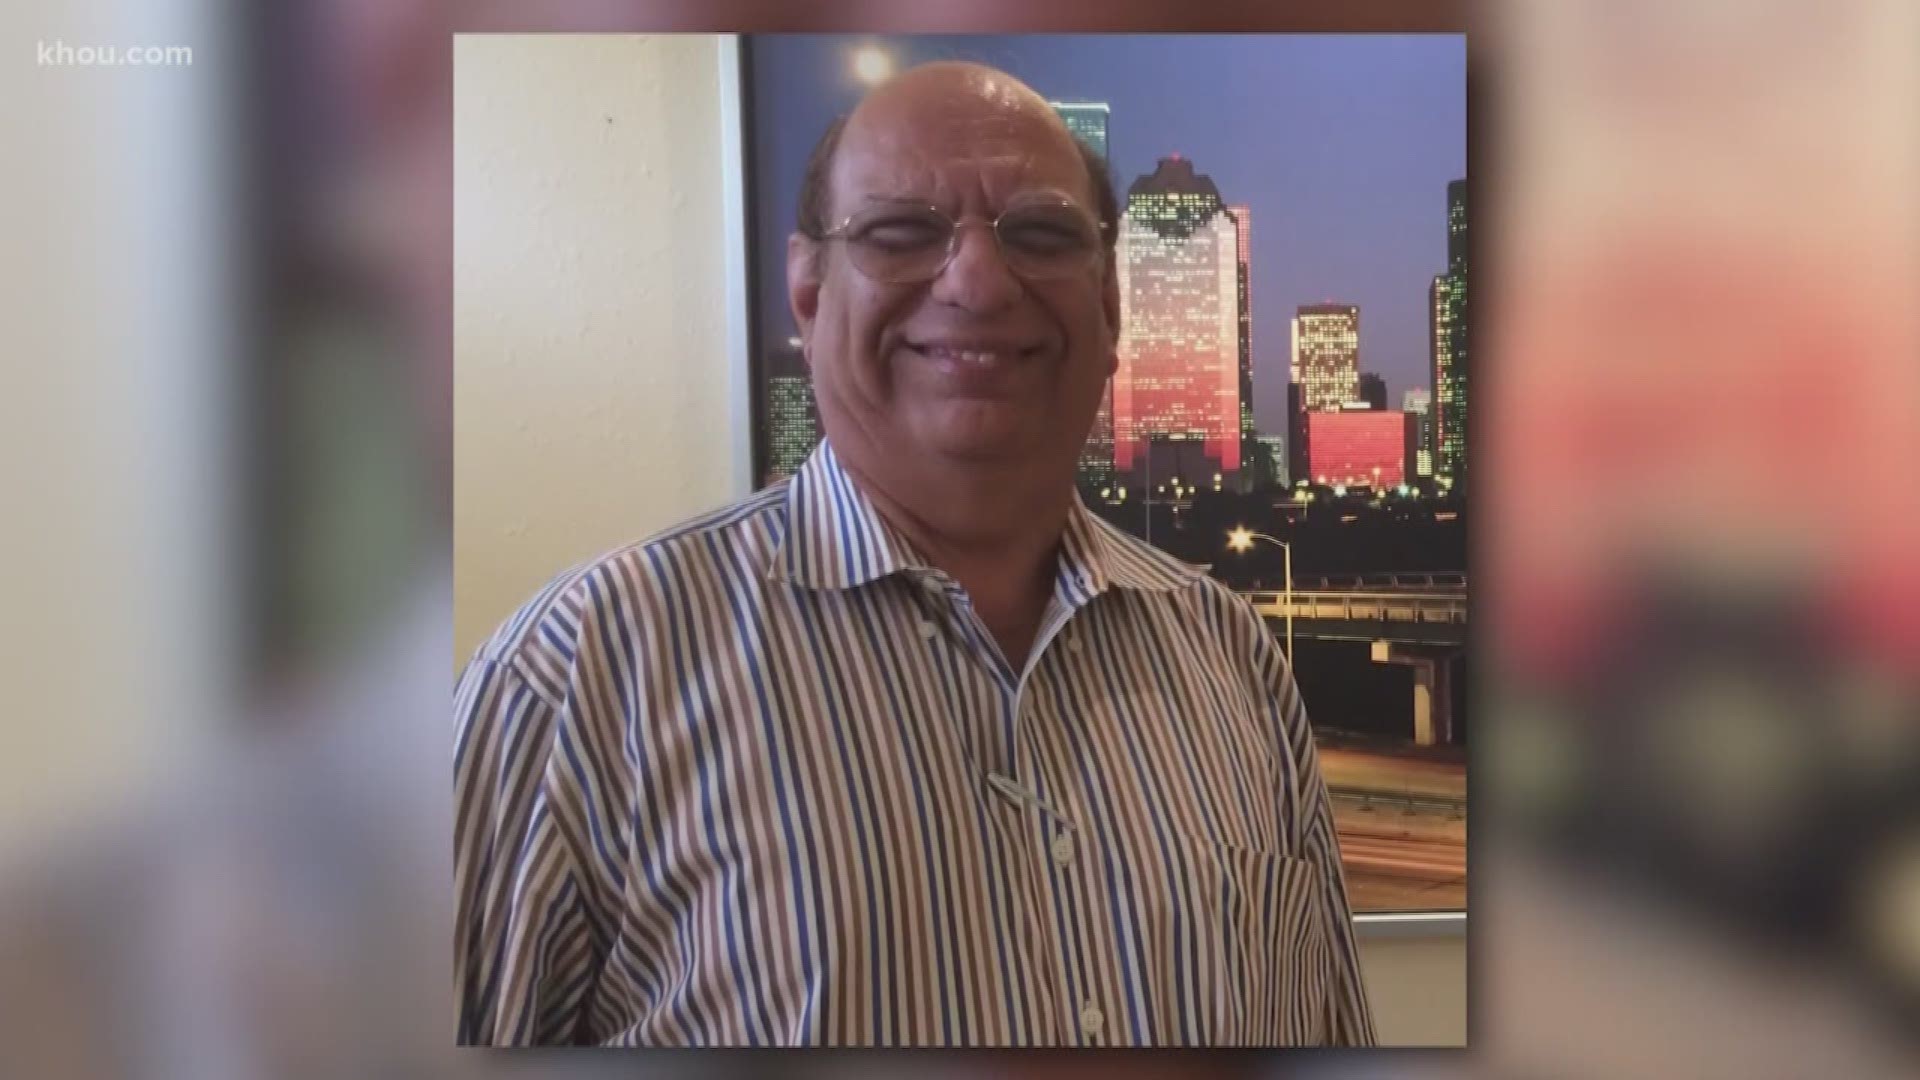 Authorities have identified a pilot killed in a small plane crash in Katy Saturday morning. Noshir Medhora, 70, died in the fiery crash at a community center in the Nottingham Country neighborhood on Kingsland Boulevard around 10:30 a.m.